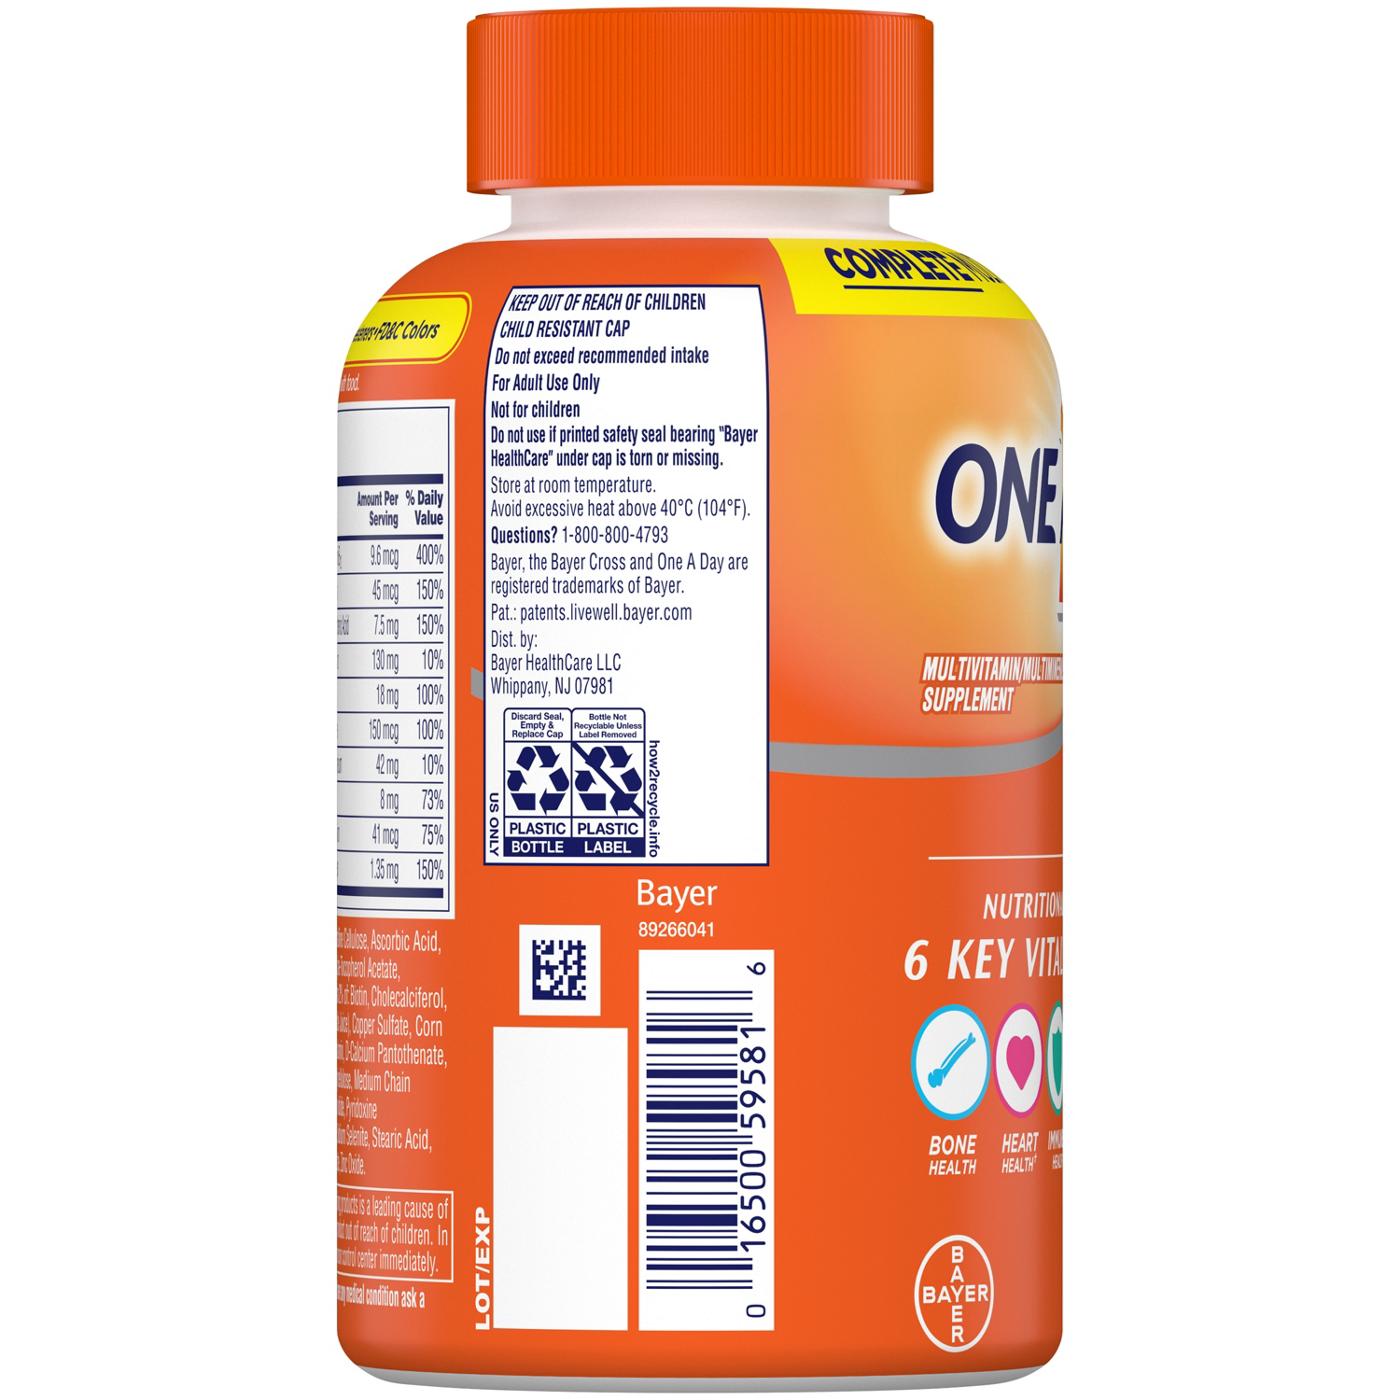 One A Day Women's Multivitamin Tablets; image 2 of 6